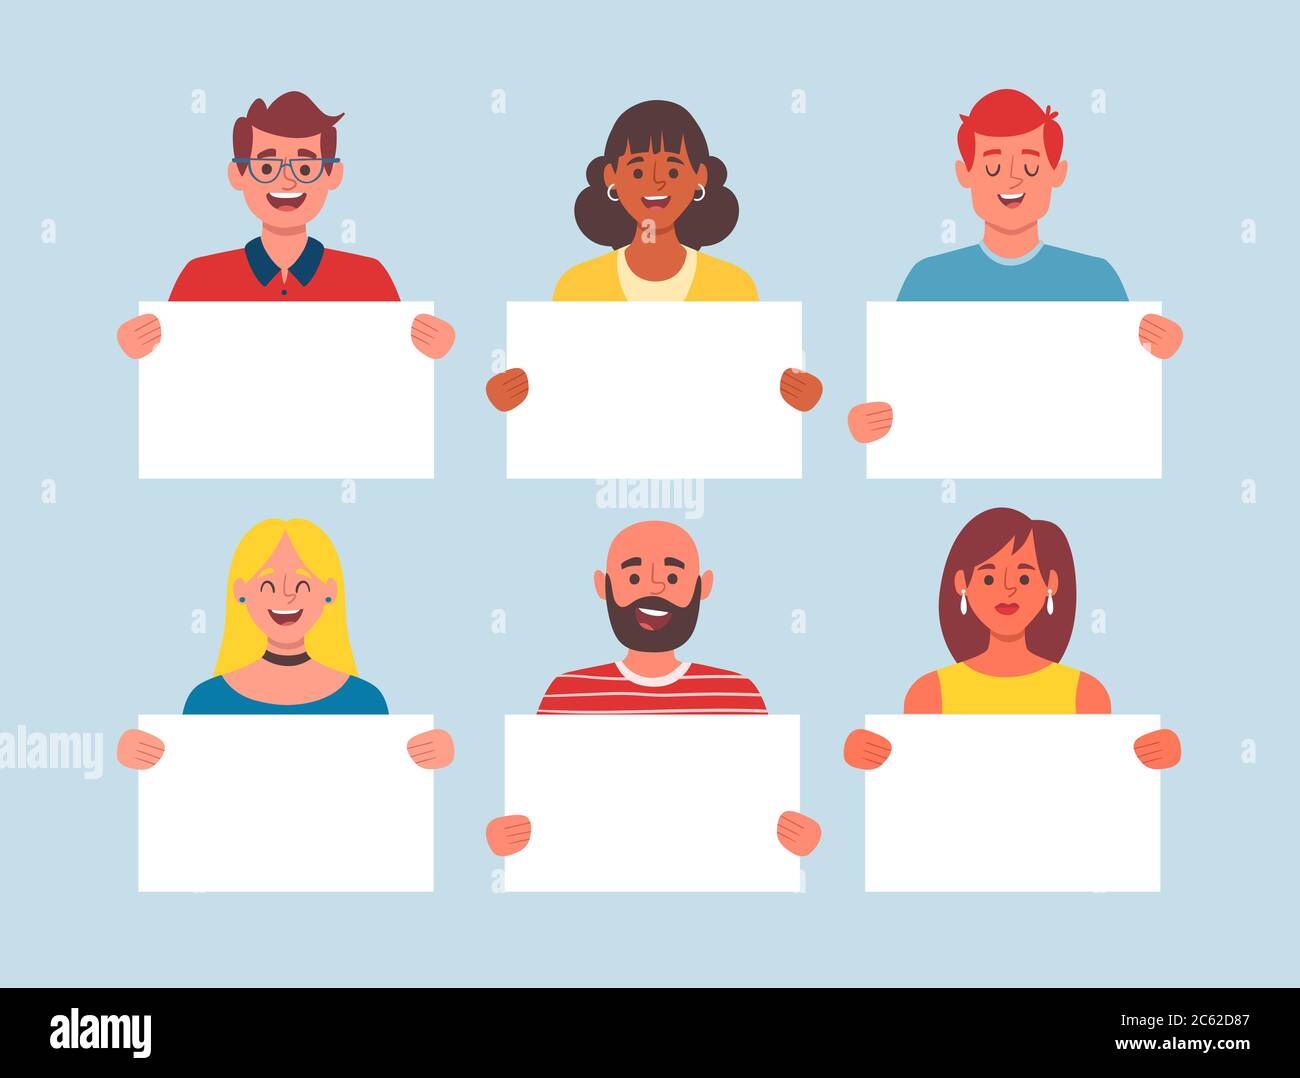 Collection of young people holding blank placards. Bundle of male and female cartoon characters. Colorful vector illustration in flat style. Stock Vector